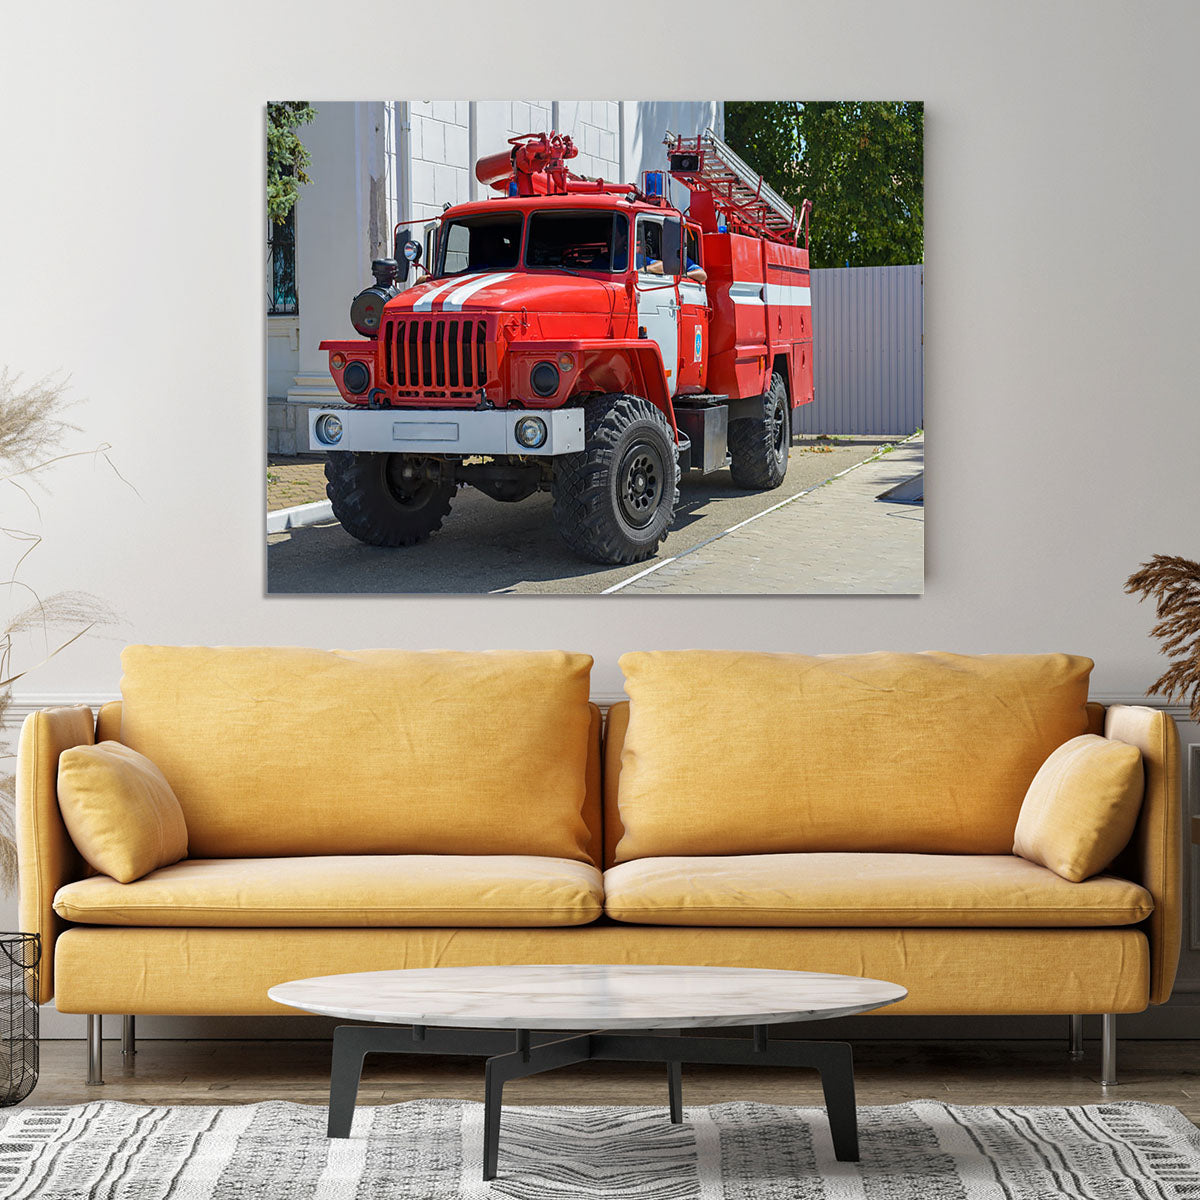 Fire Truck In The City Canvas Print or Poster - Canvas Art Rocks - 4